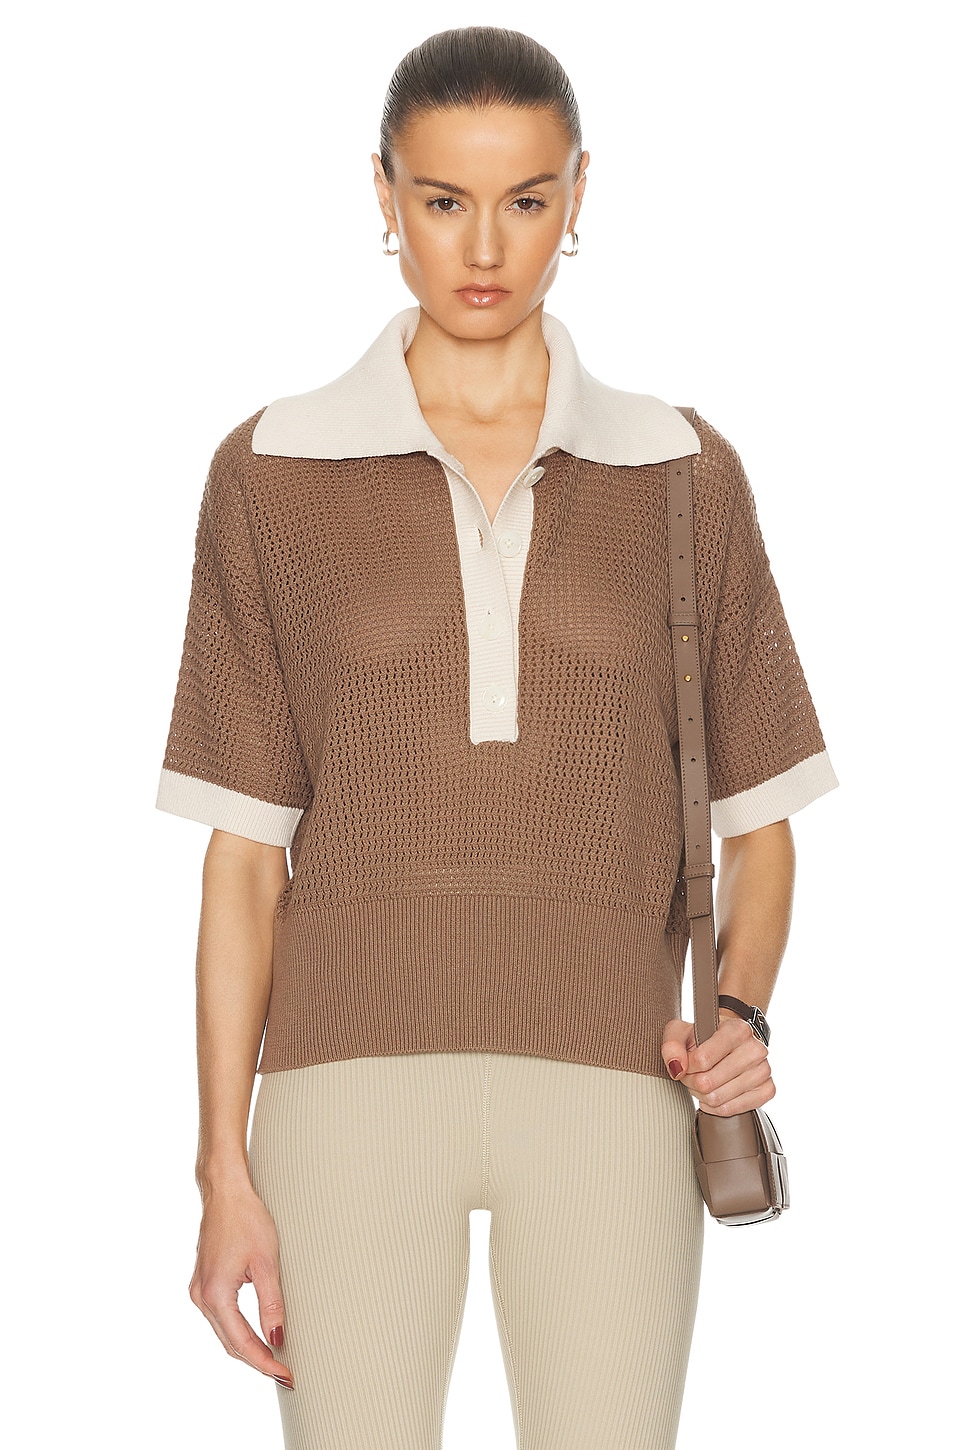 Image 1 of Varley Finch Knit Polo Top in Taupe & Whitecap Grey